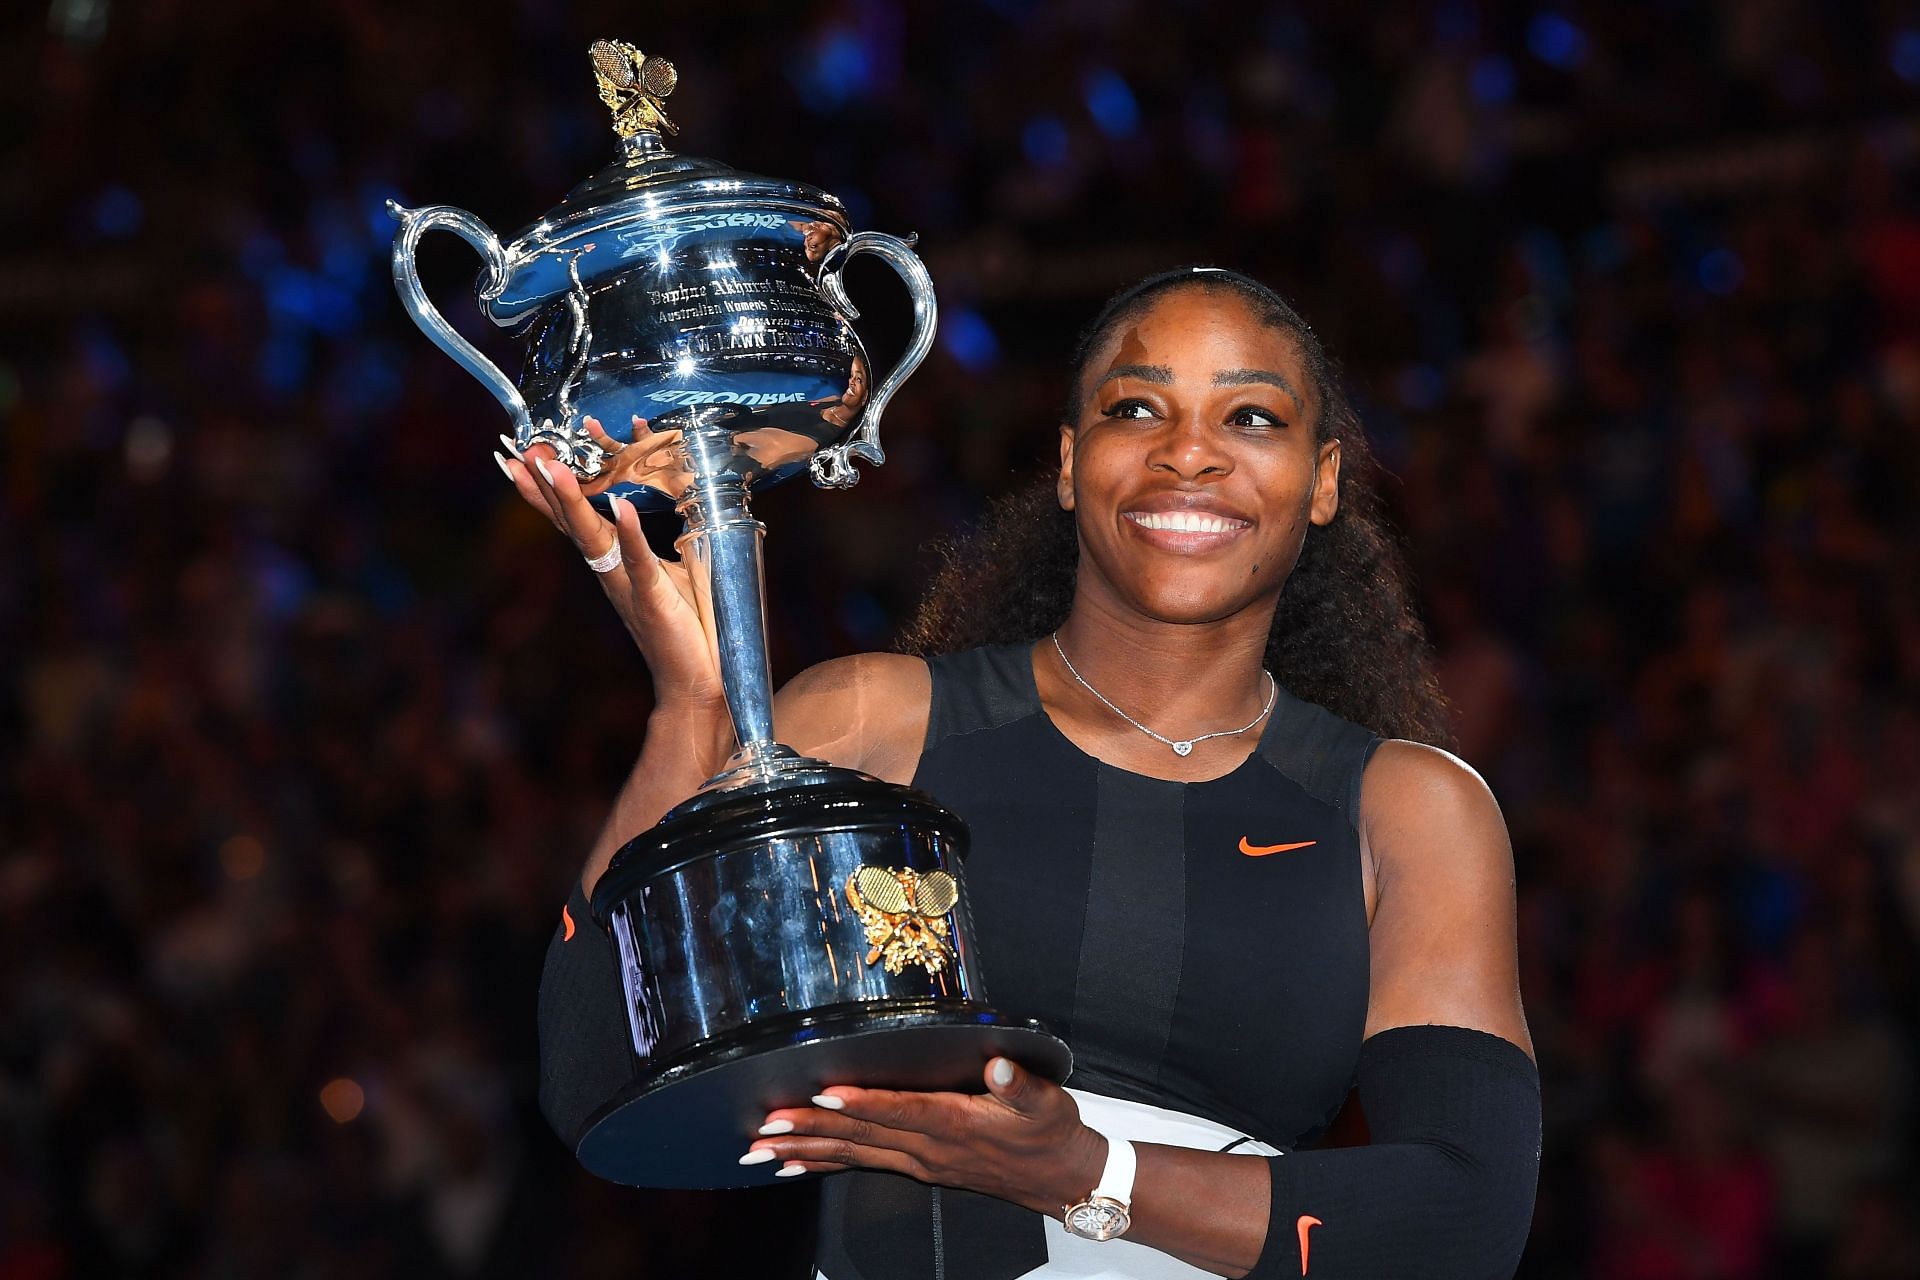 Serena Williams knocked out Venus Williams to win her record-breaking 23rd Grand Slam title in Melbourne